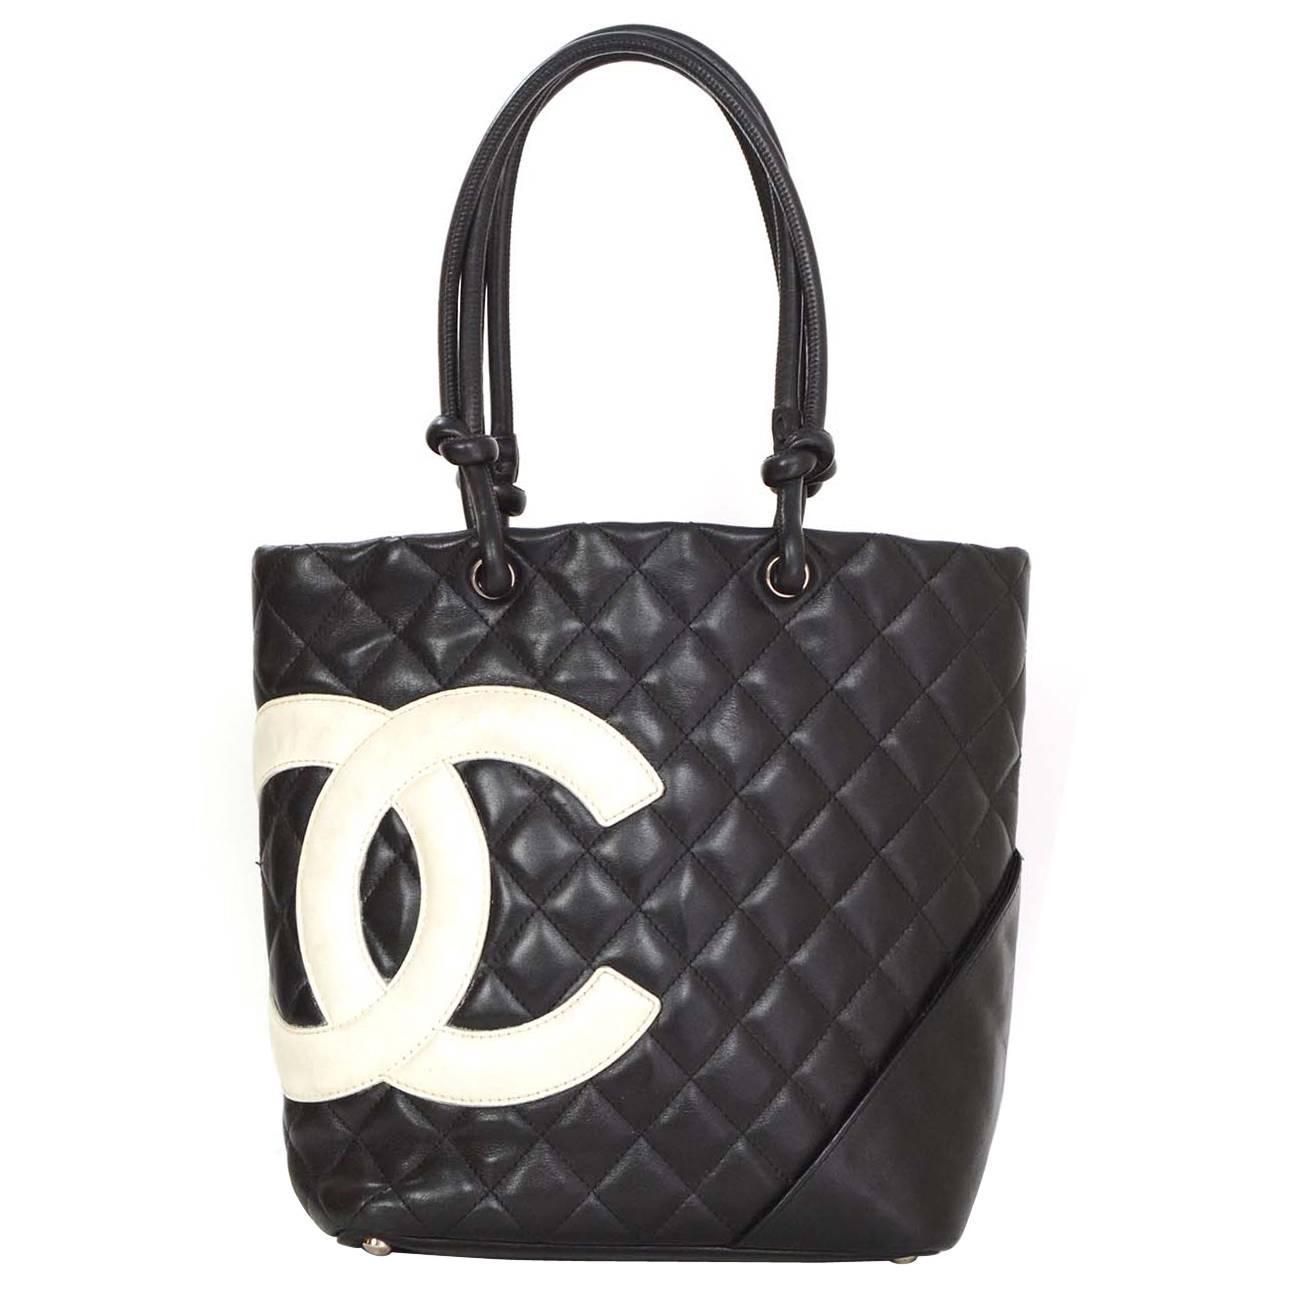 Chanel Black and White Leather Cambon Tote Bag SHW at 1stdibs